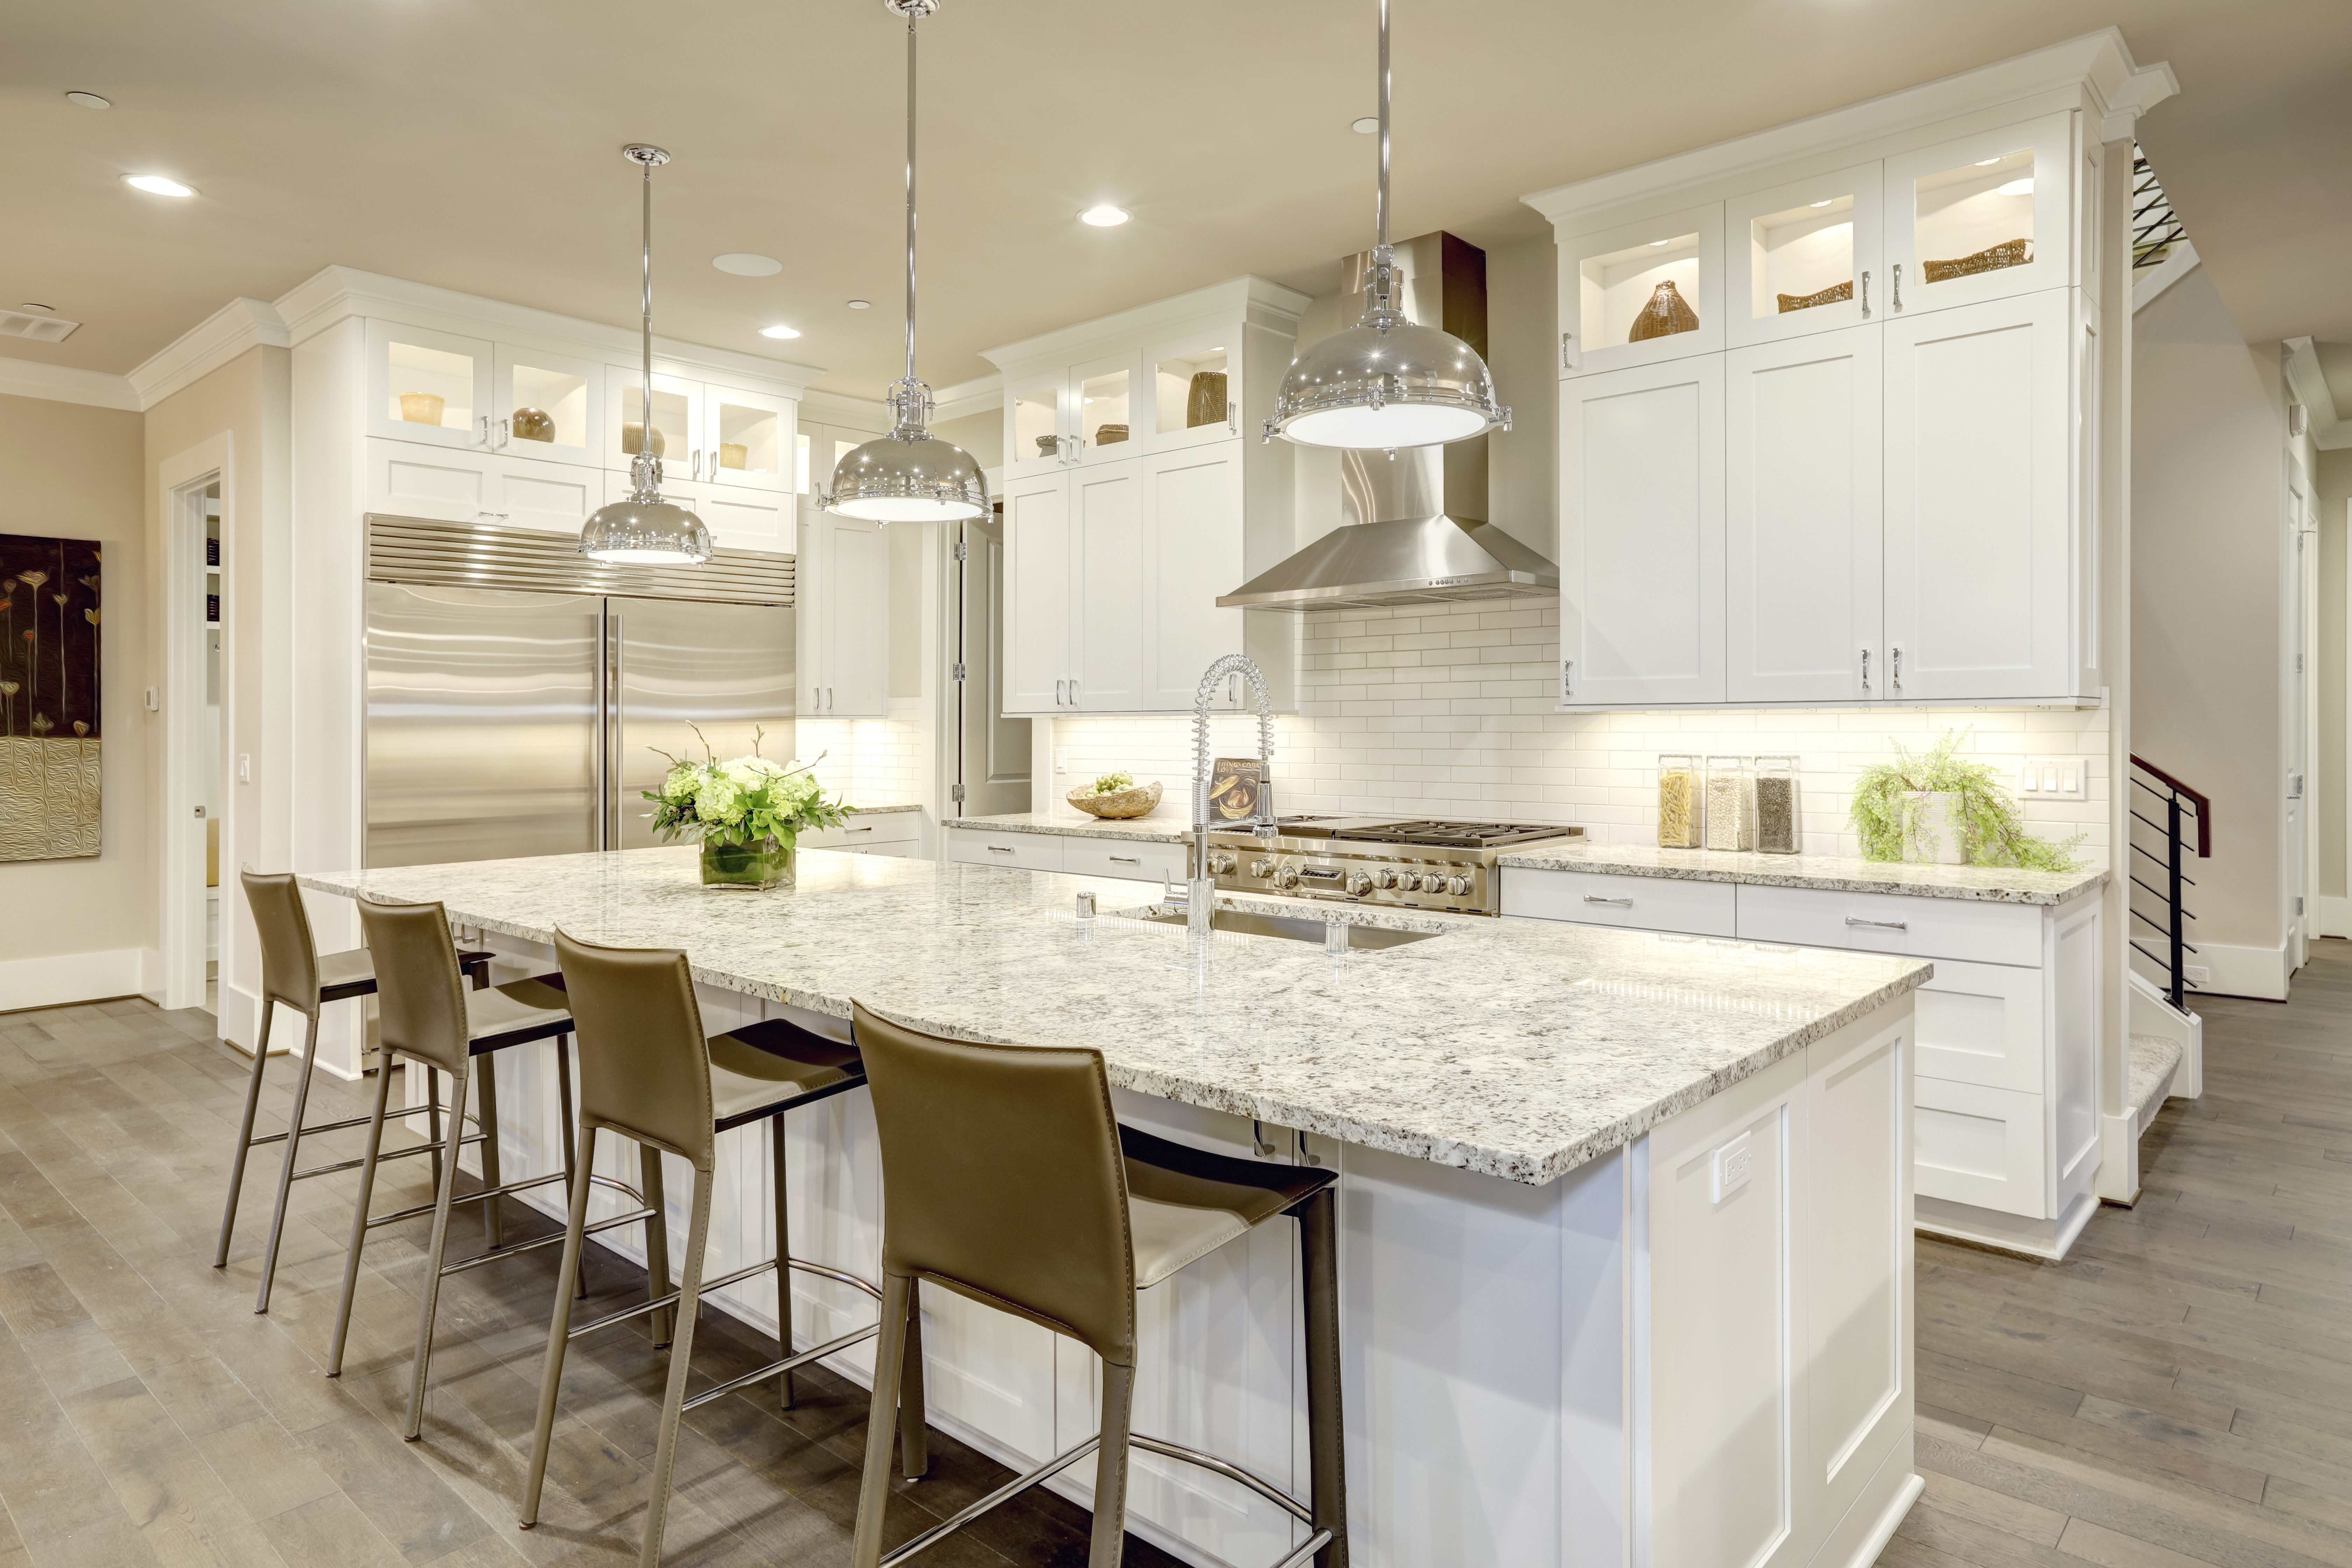 White kitchen design features large bar style kitchen island with granite countertop | Pierce Carpet Mill Outlet